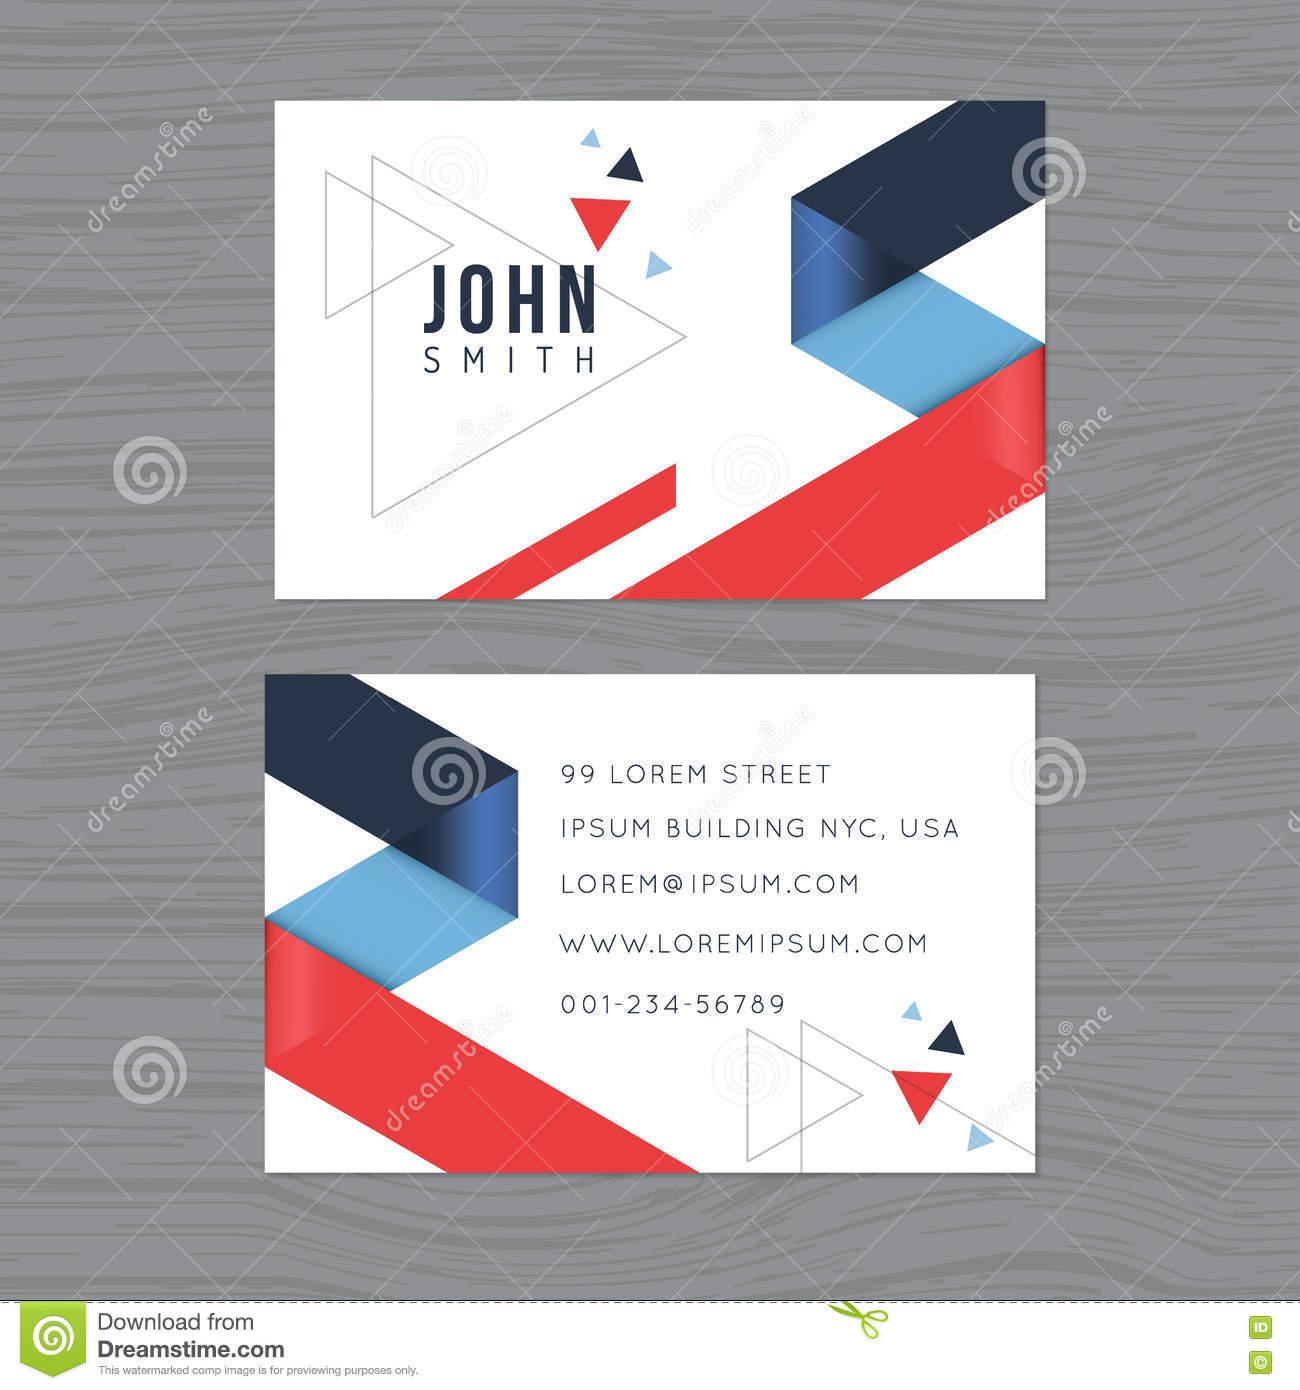 Blue with a Red Triangle Logo - Modern And Clean Design Business Card Template Blue Red Triangle